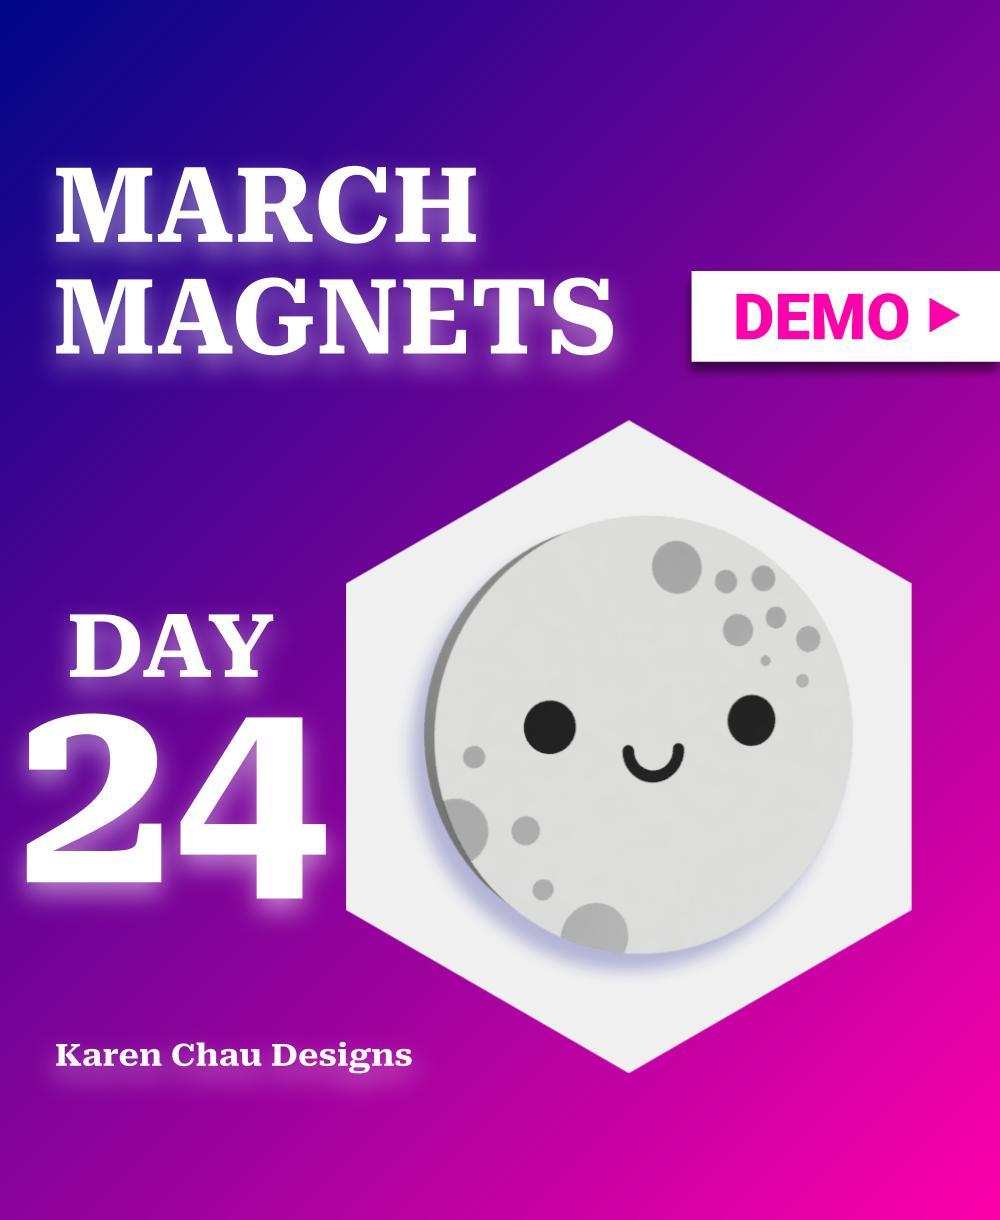 March Magnets - Day 24 #marchmagnets | Cute Moon Magnet 3d model